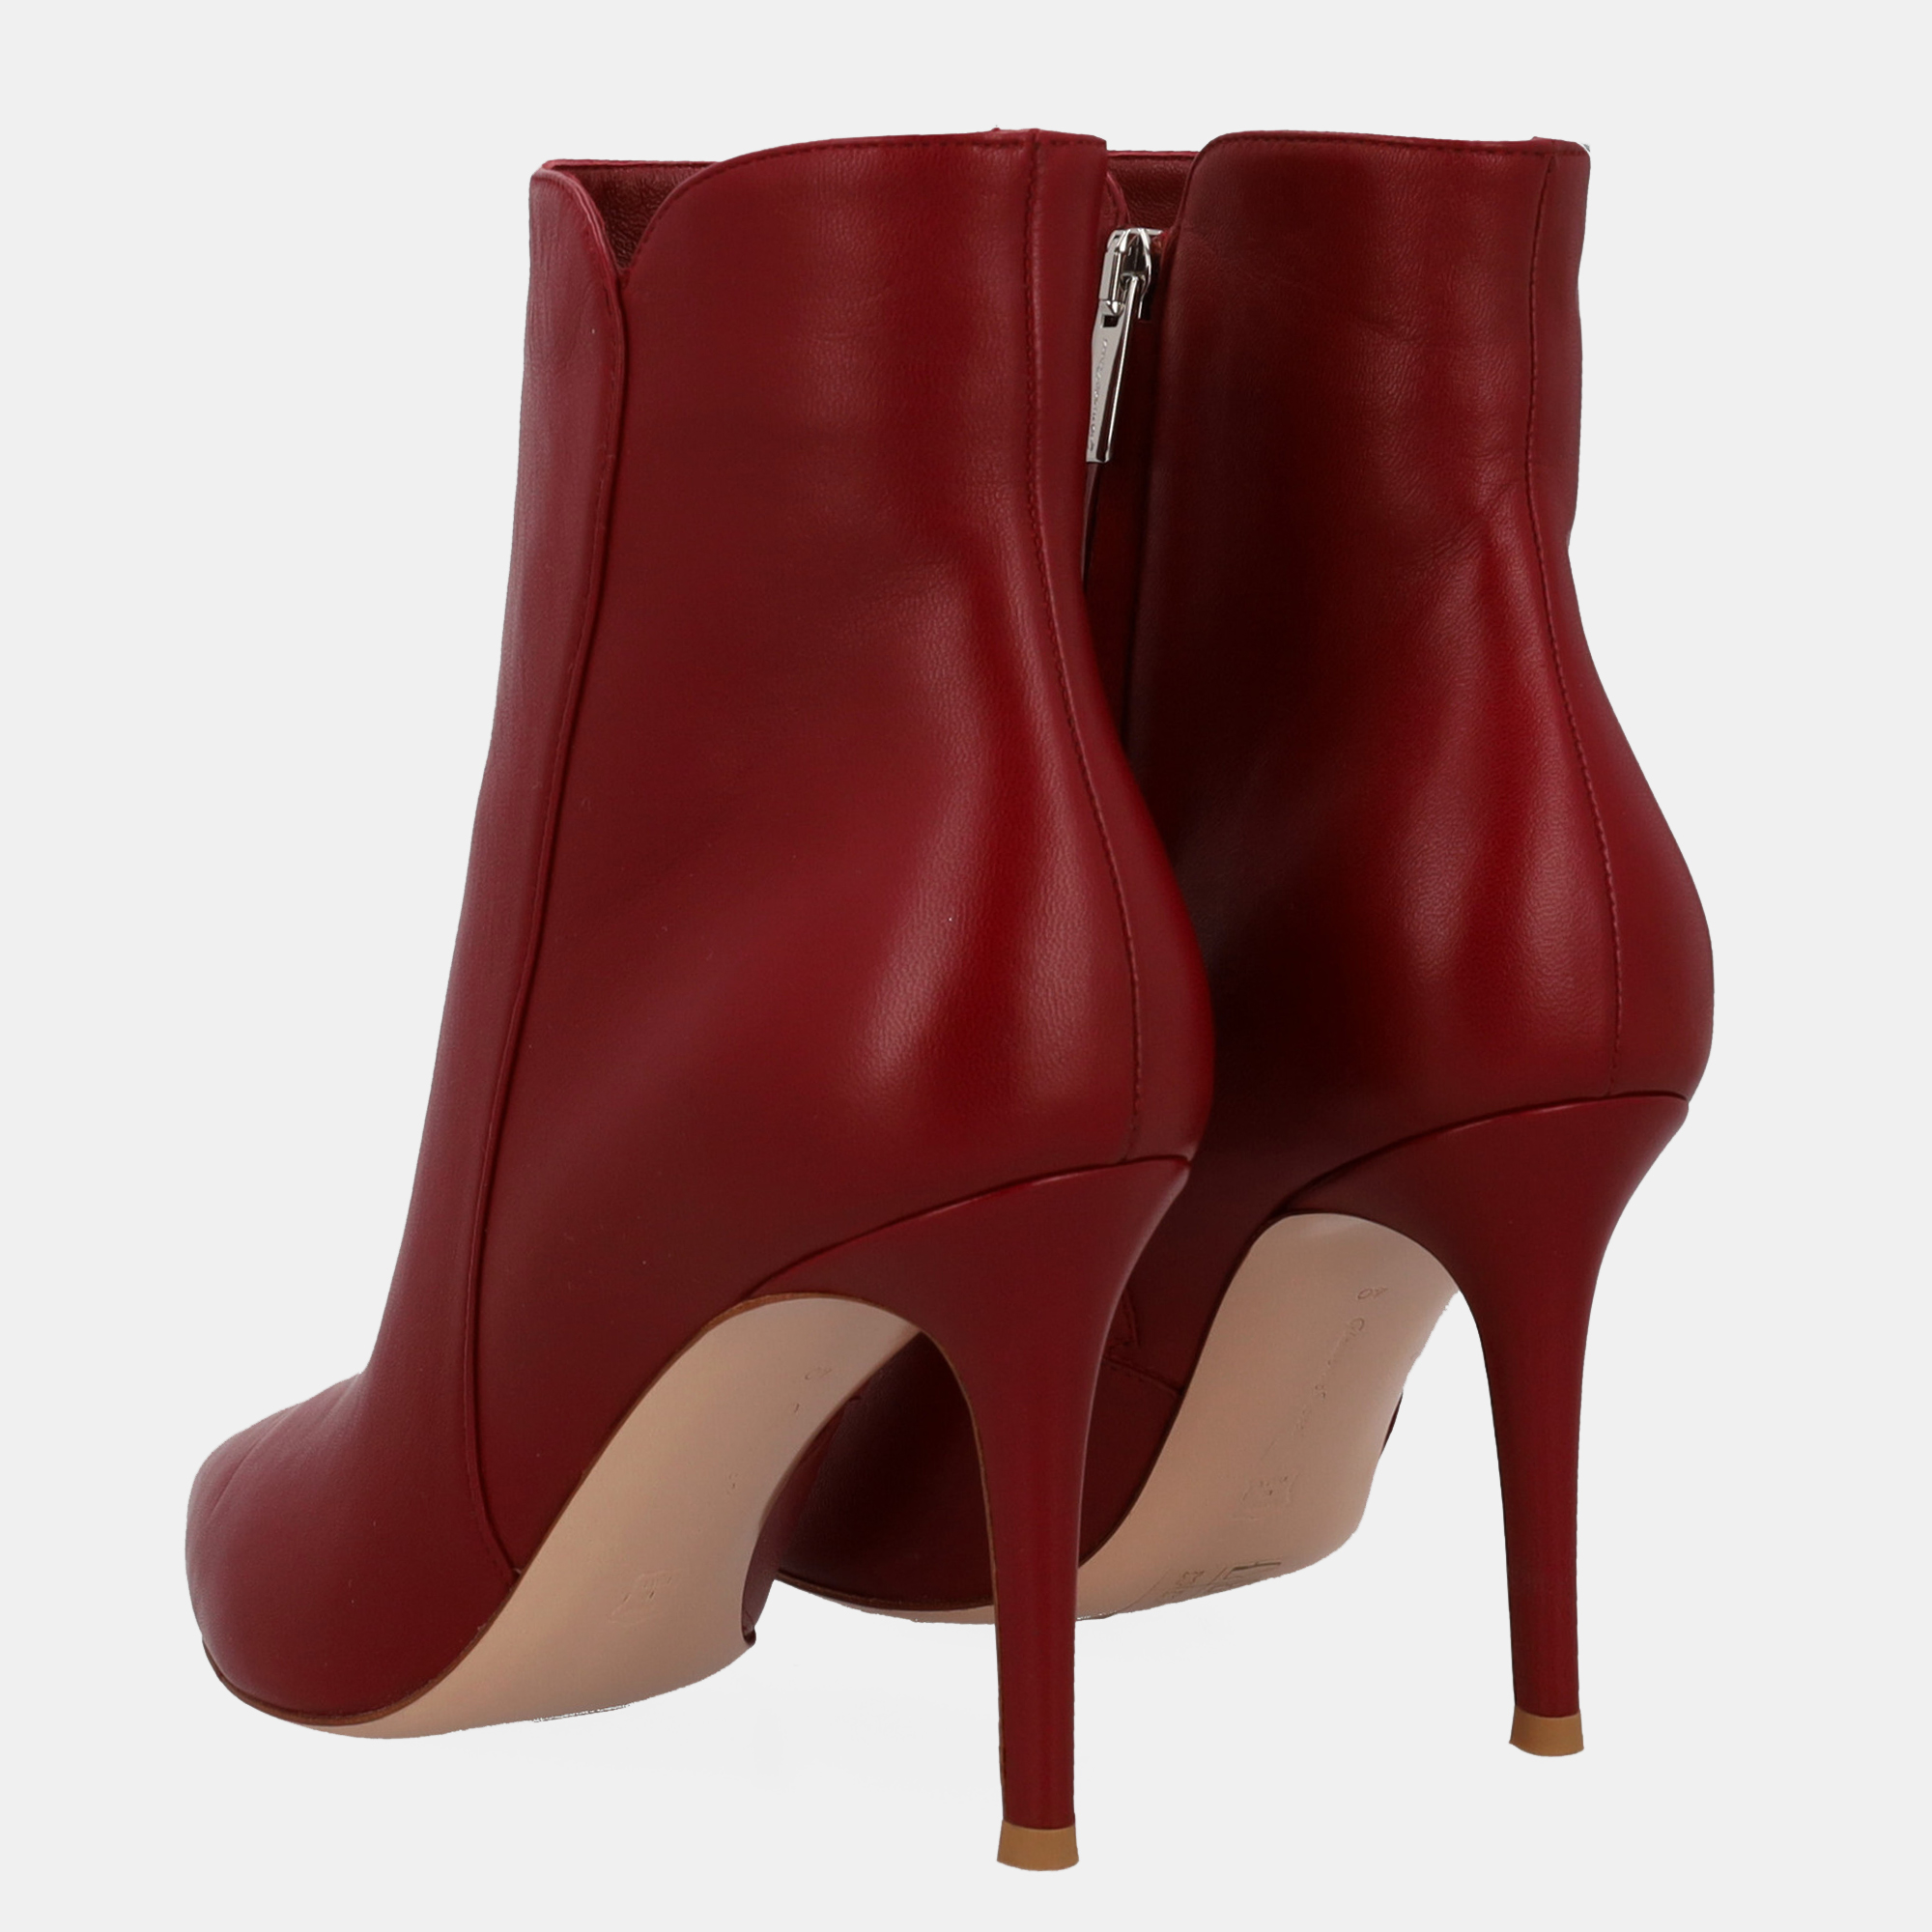 Gianvito Rossi  Women's Leather Ankle Boots - Burgundy - EU 40